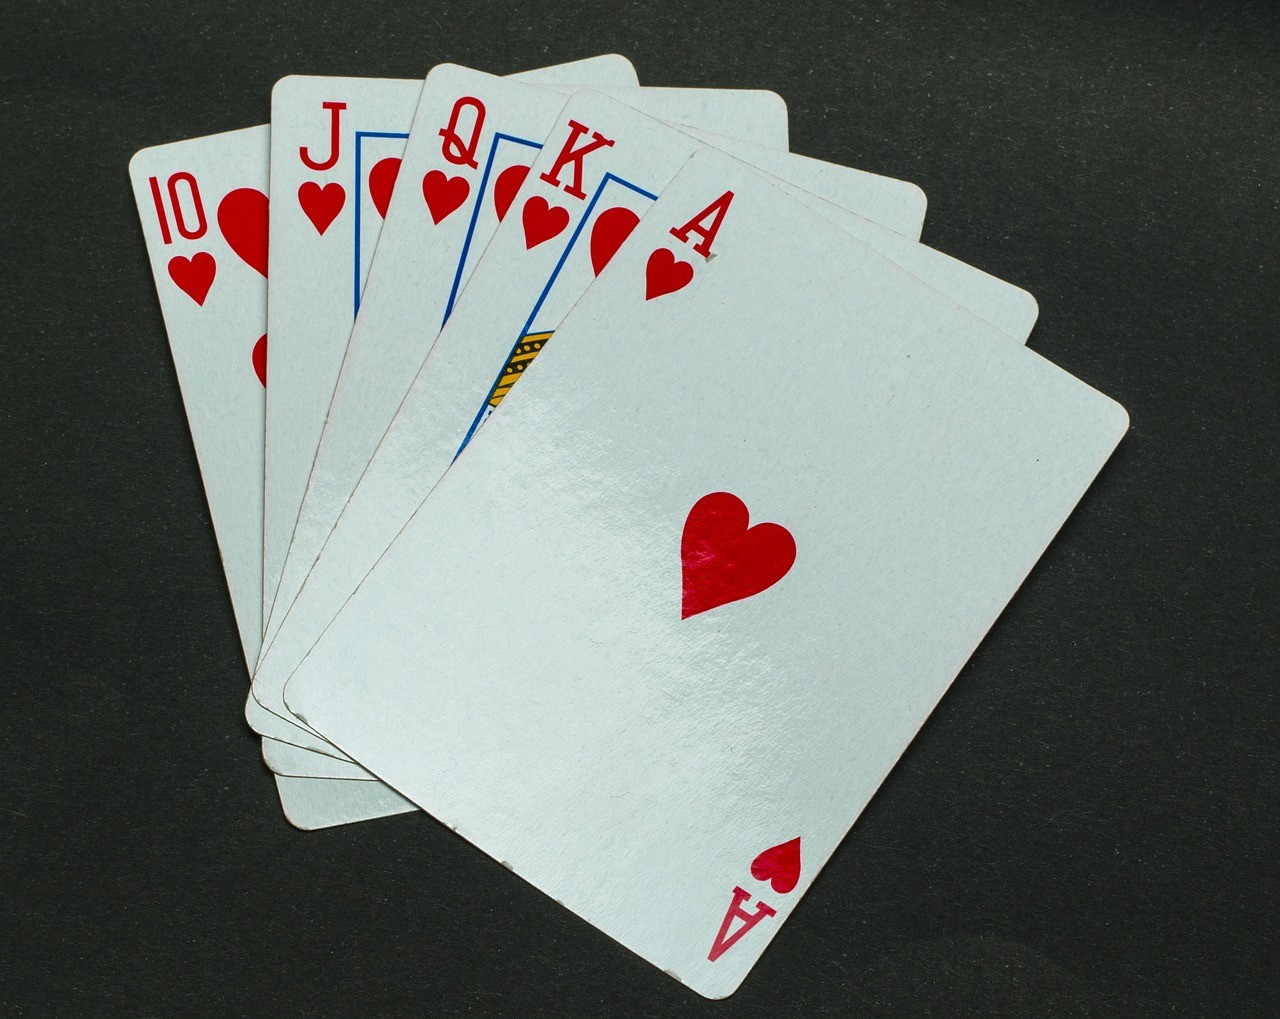 5 Things You Need to Know Before Playing Online Poker